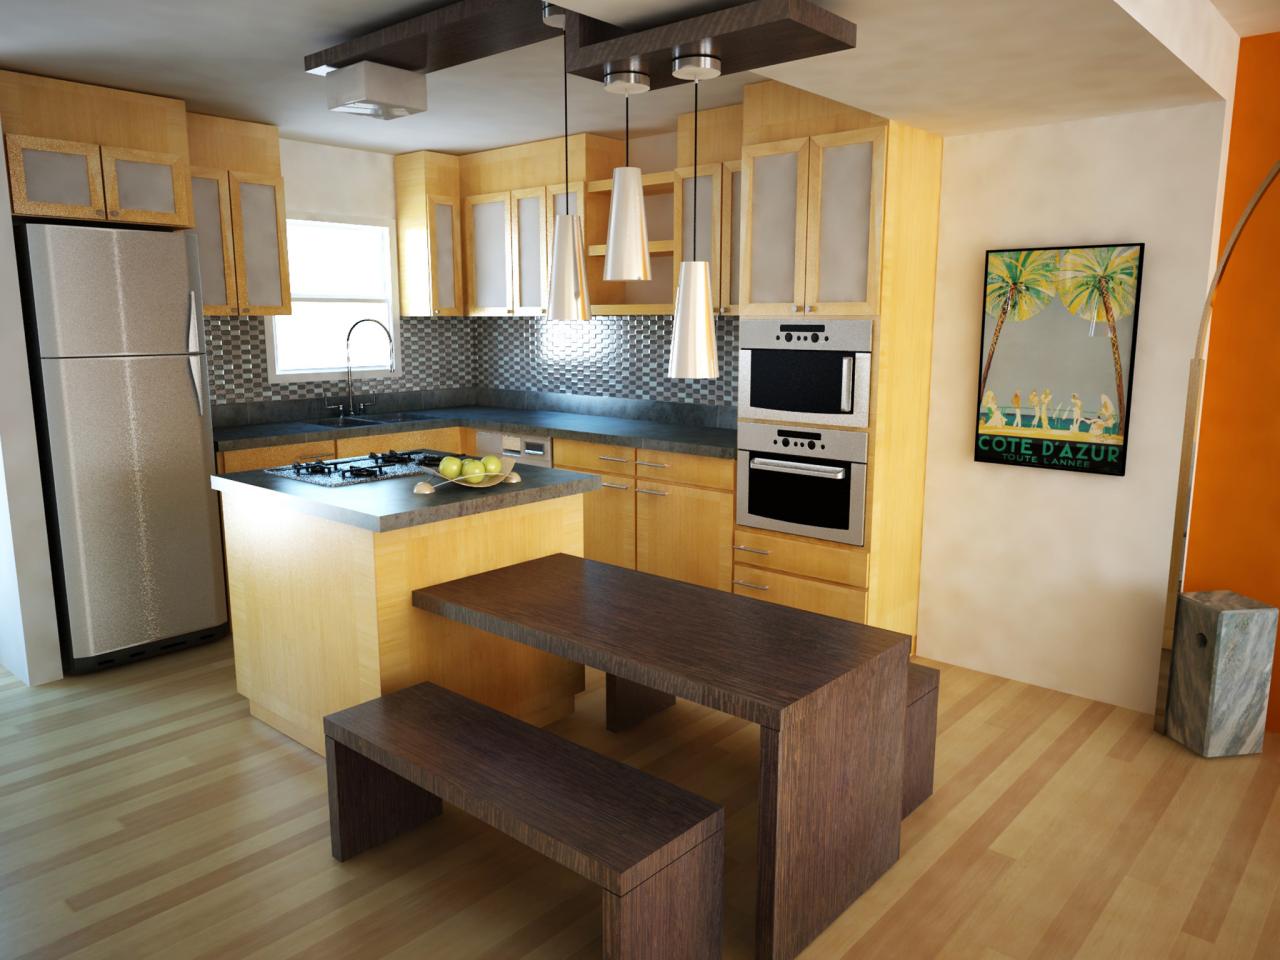 Small Kitchen Layouts Pictures Ideas Tips From Hgtv Hgtv,Graphic Designer Wage